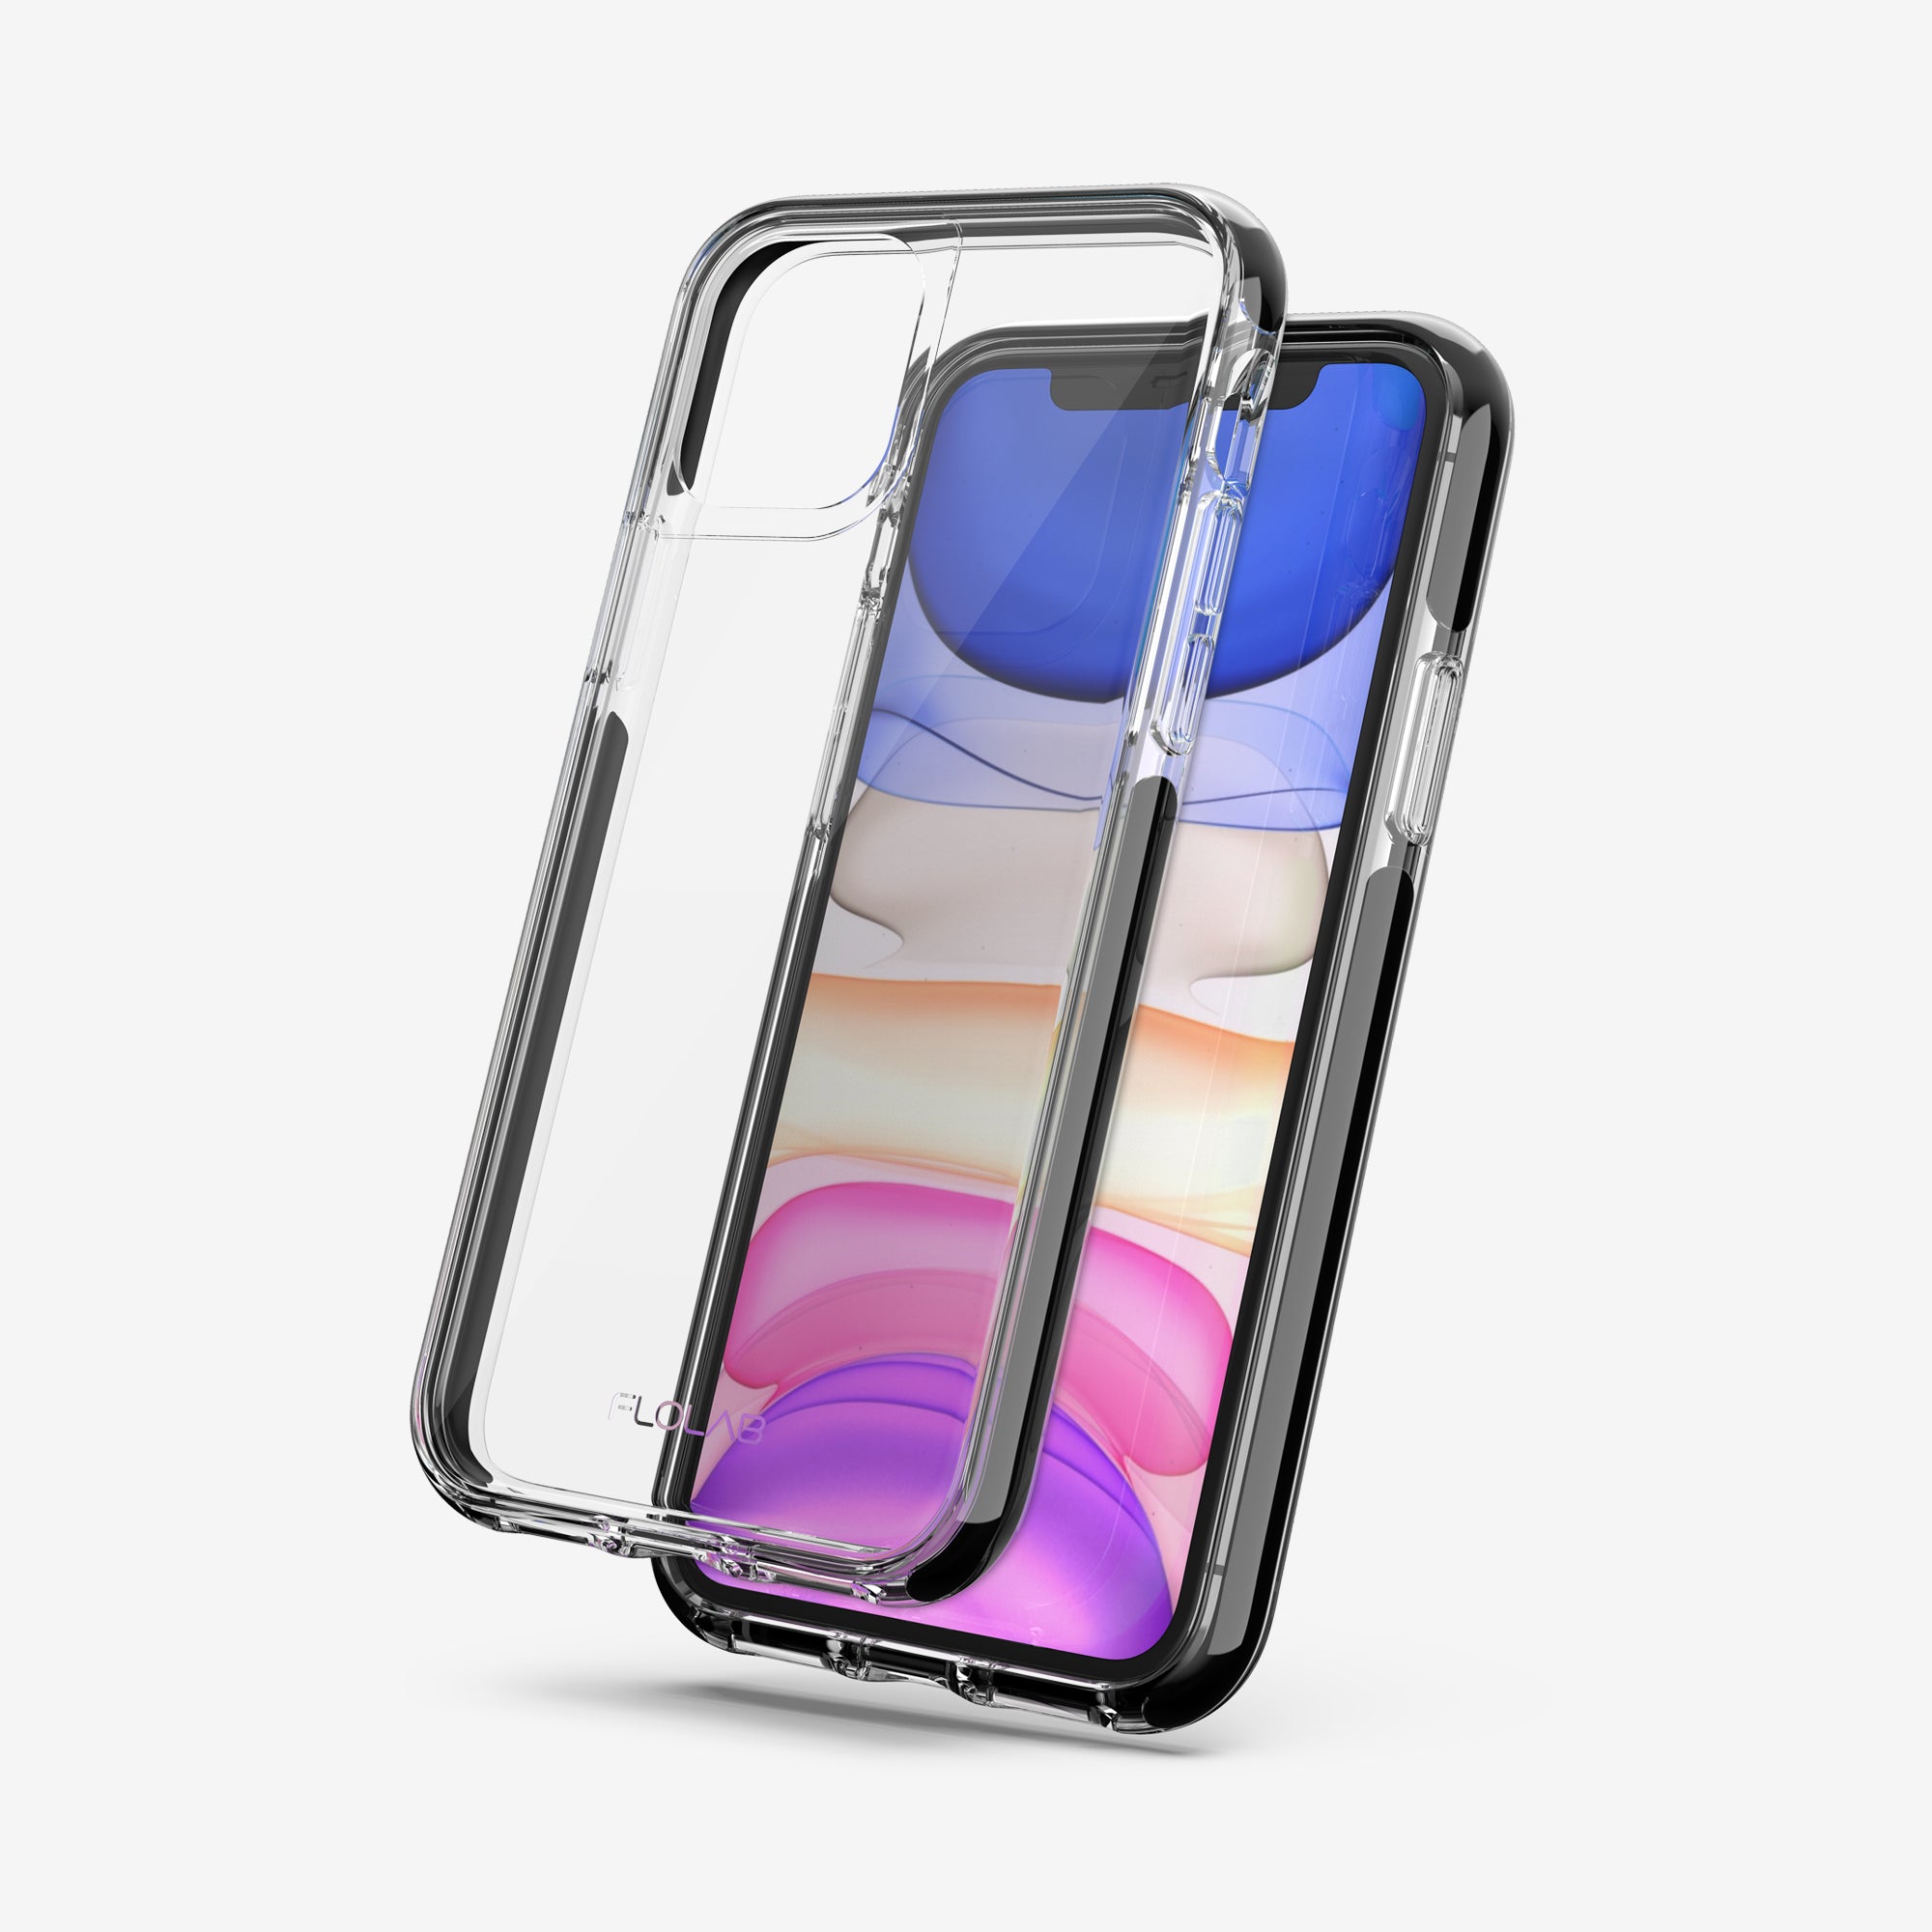 FLOLAB I iPhone 11 Privacy Screen Protector